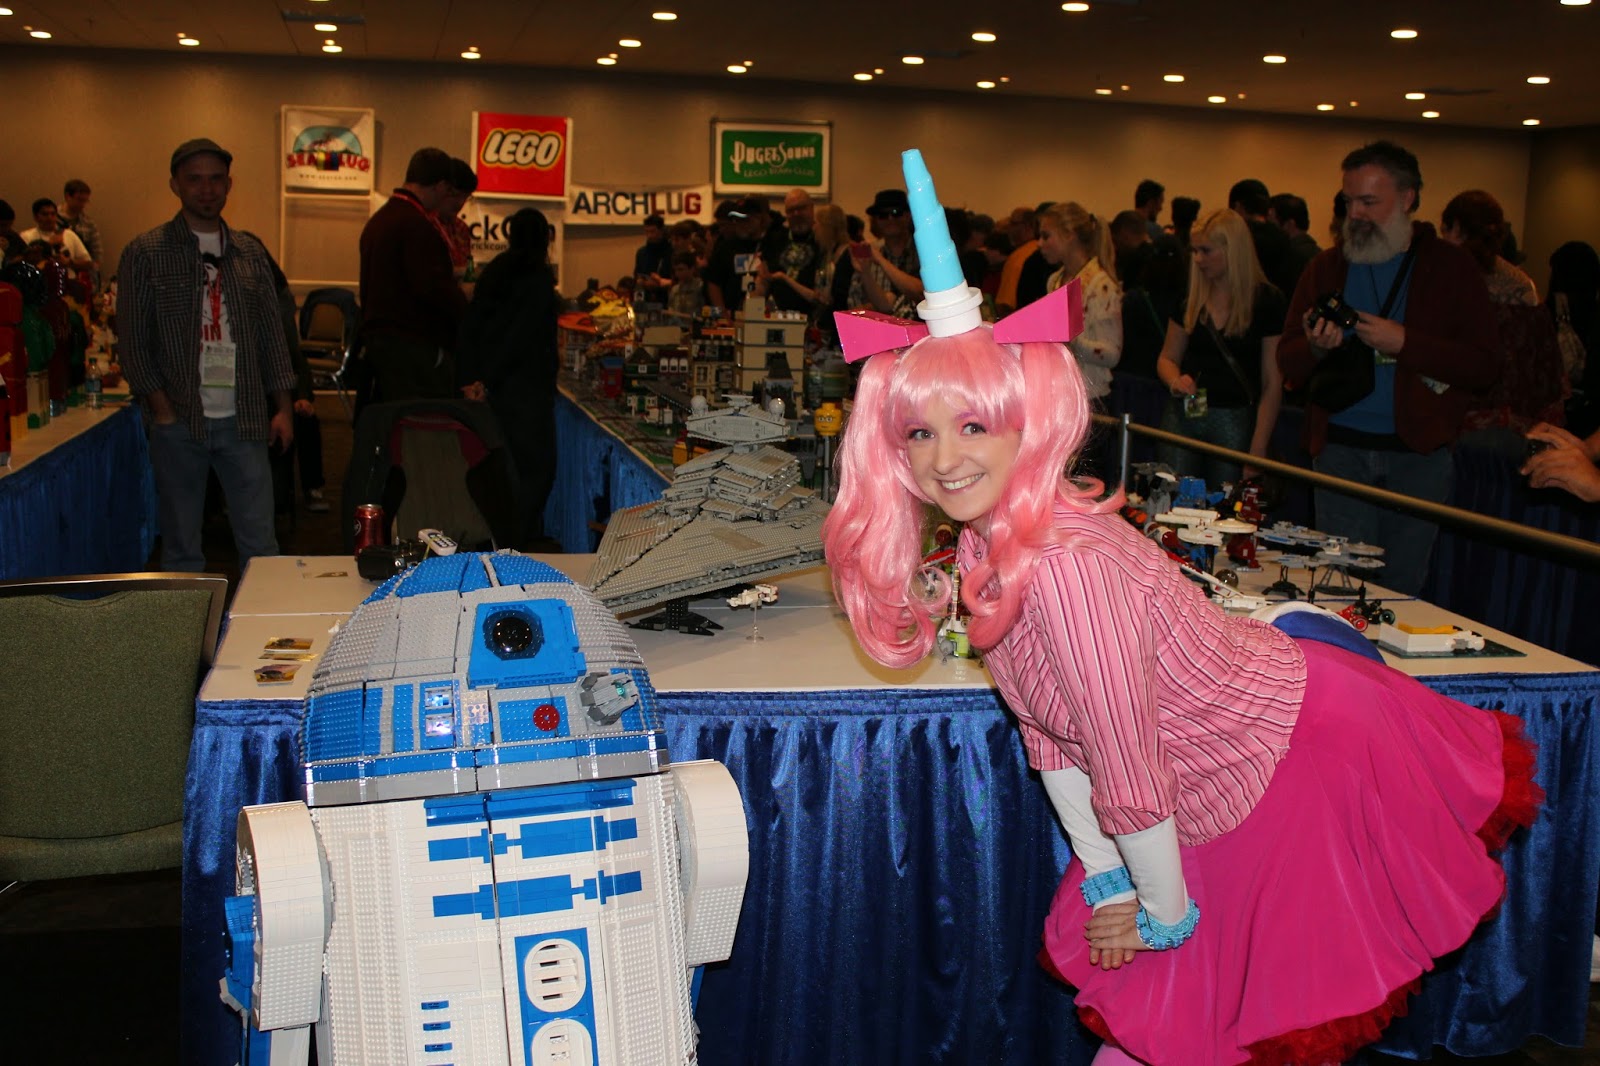 Unikitty posing with Lego R2-D2 (life size)